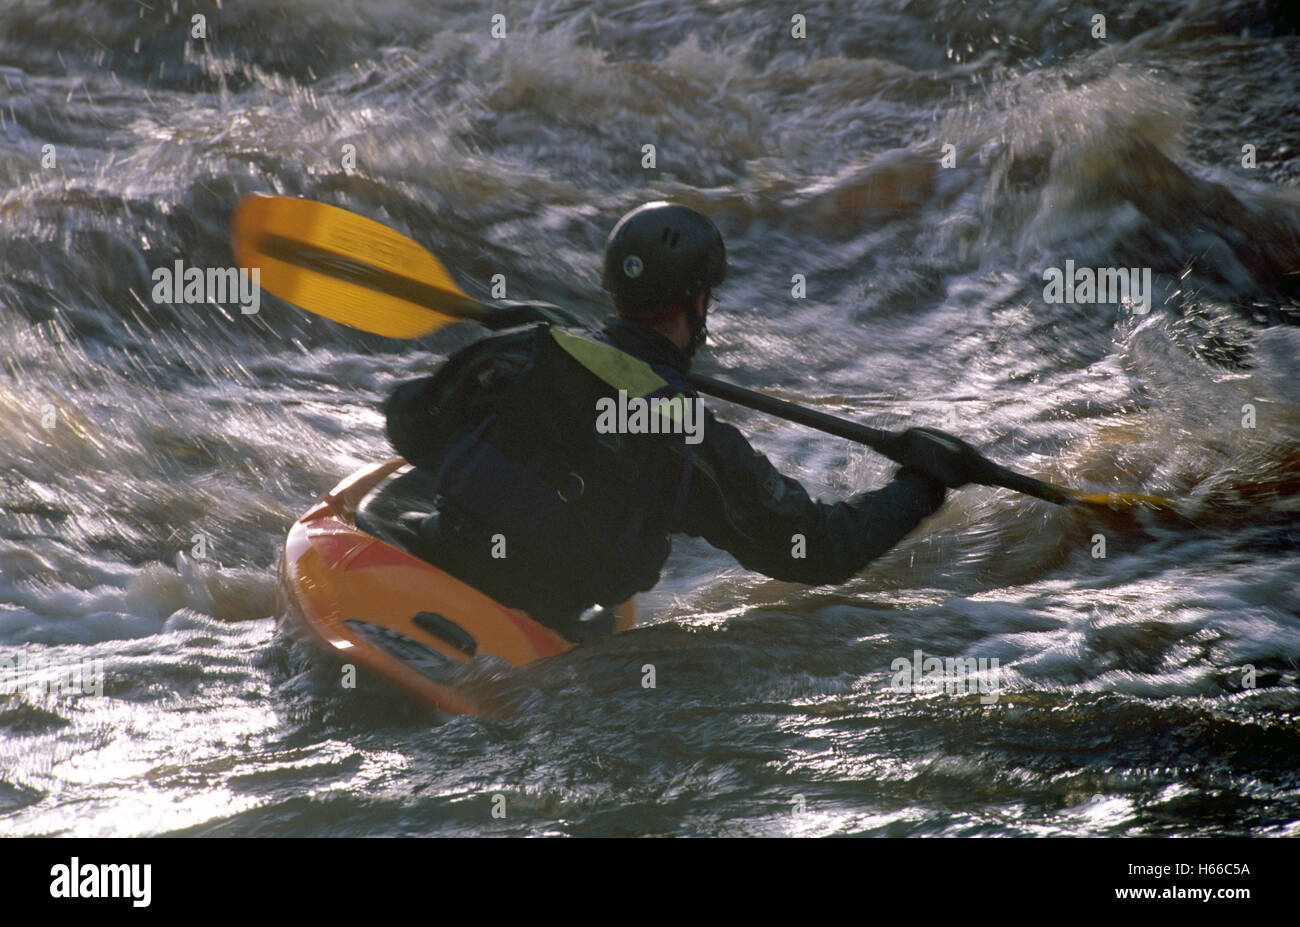 Kayaker on the River Roe, Limavady, County Derry, Northern Ireland. Stock Photo